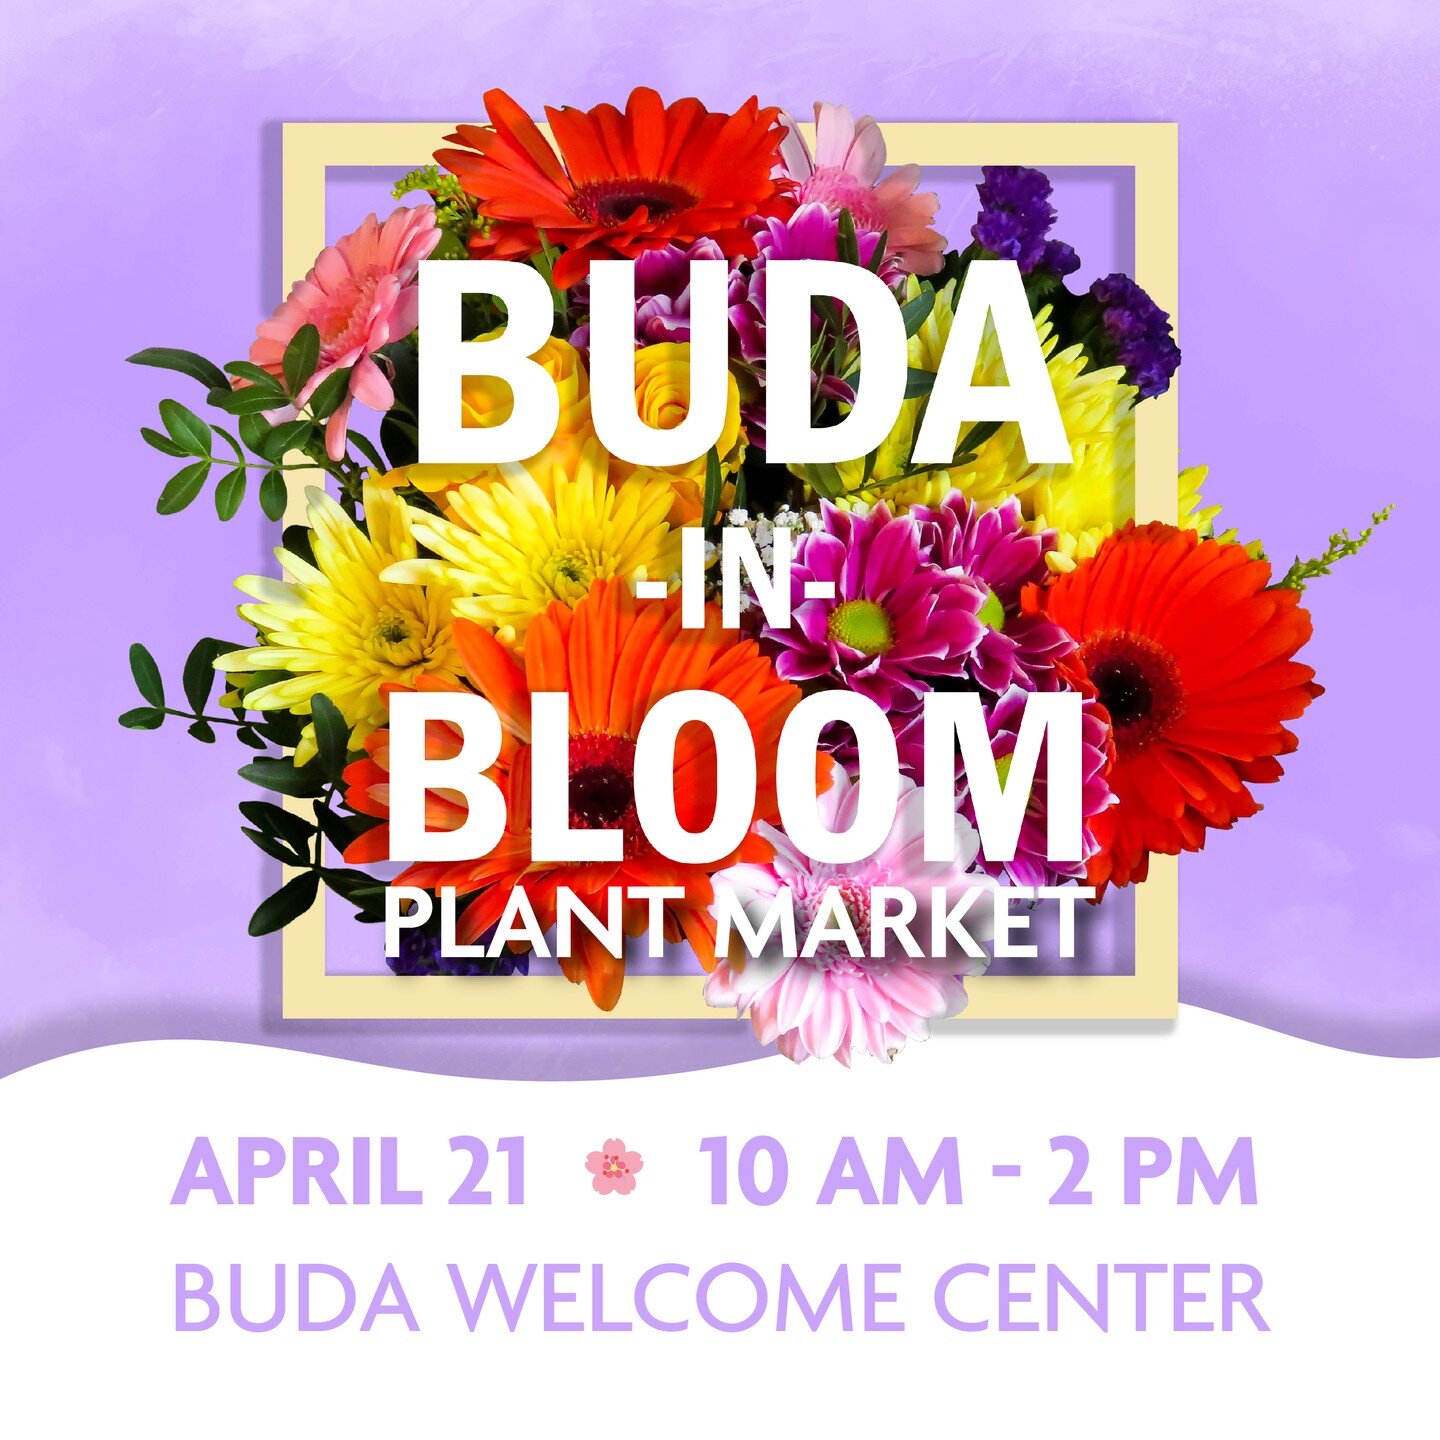 It's National Plant A Flower Day!🌹🌷

If Spring has caught you by surprise and you're not ready to get out your gardening gloves just yet, our Buda in Bloom plant market is just around the corner on April 21. Mark your calendars!